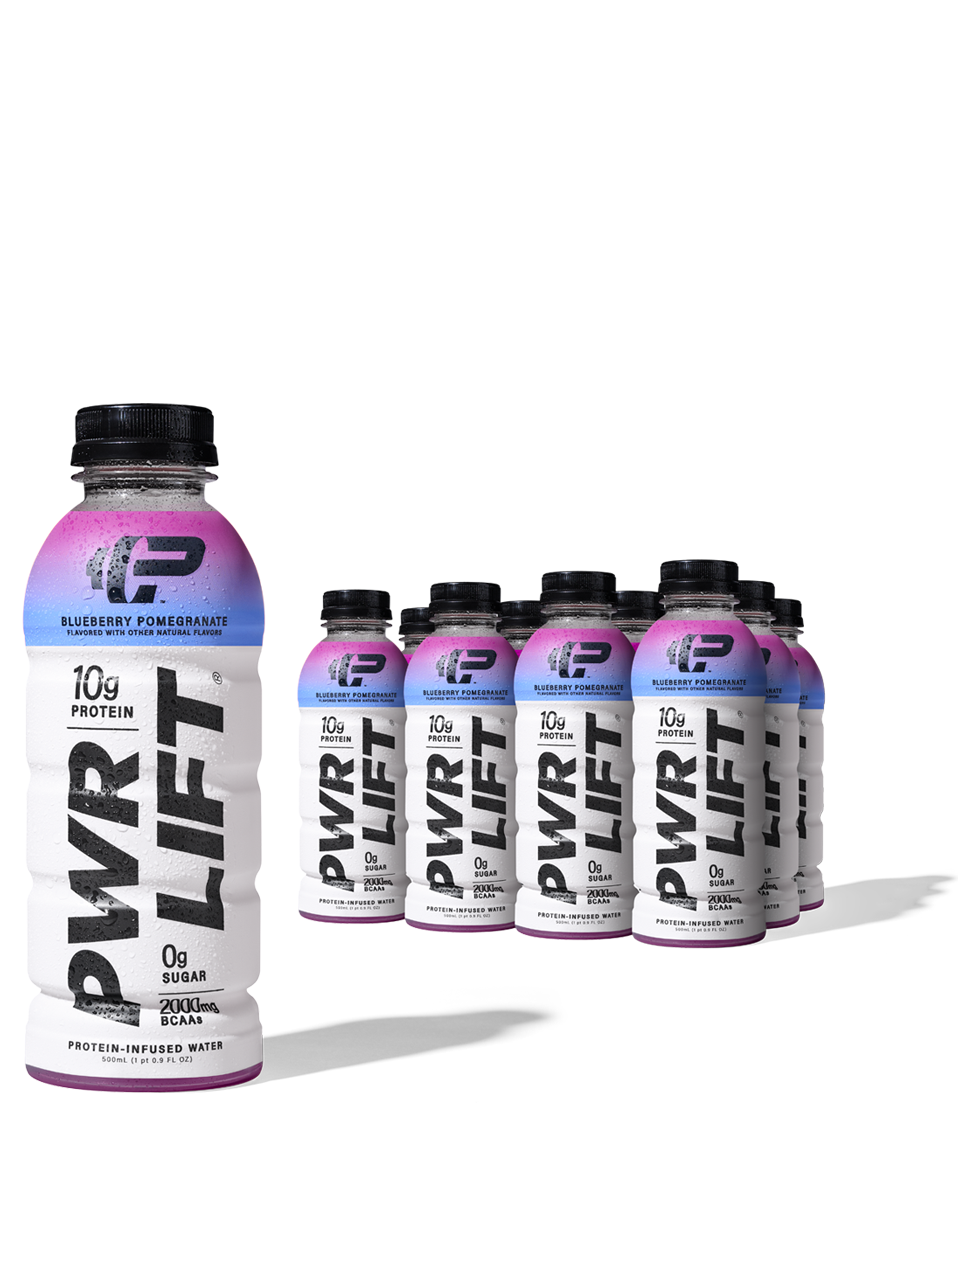 A bottle of PWR LIFT Blueberry Pomegranate in the forefront with rows of the same in the background